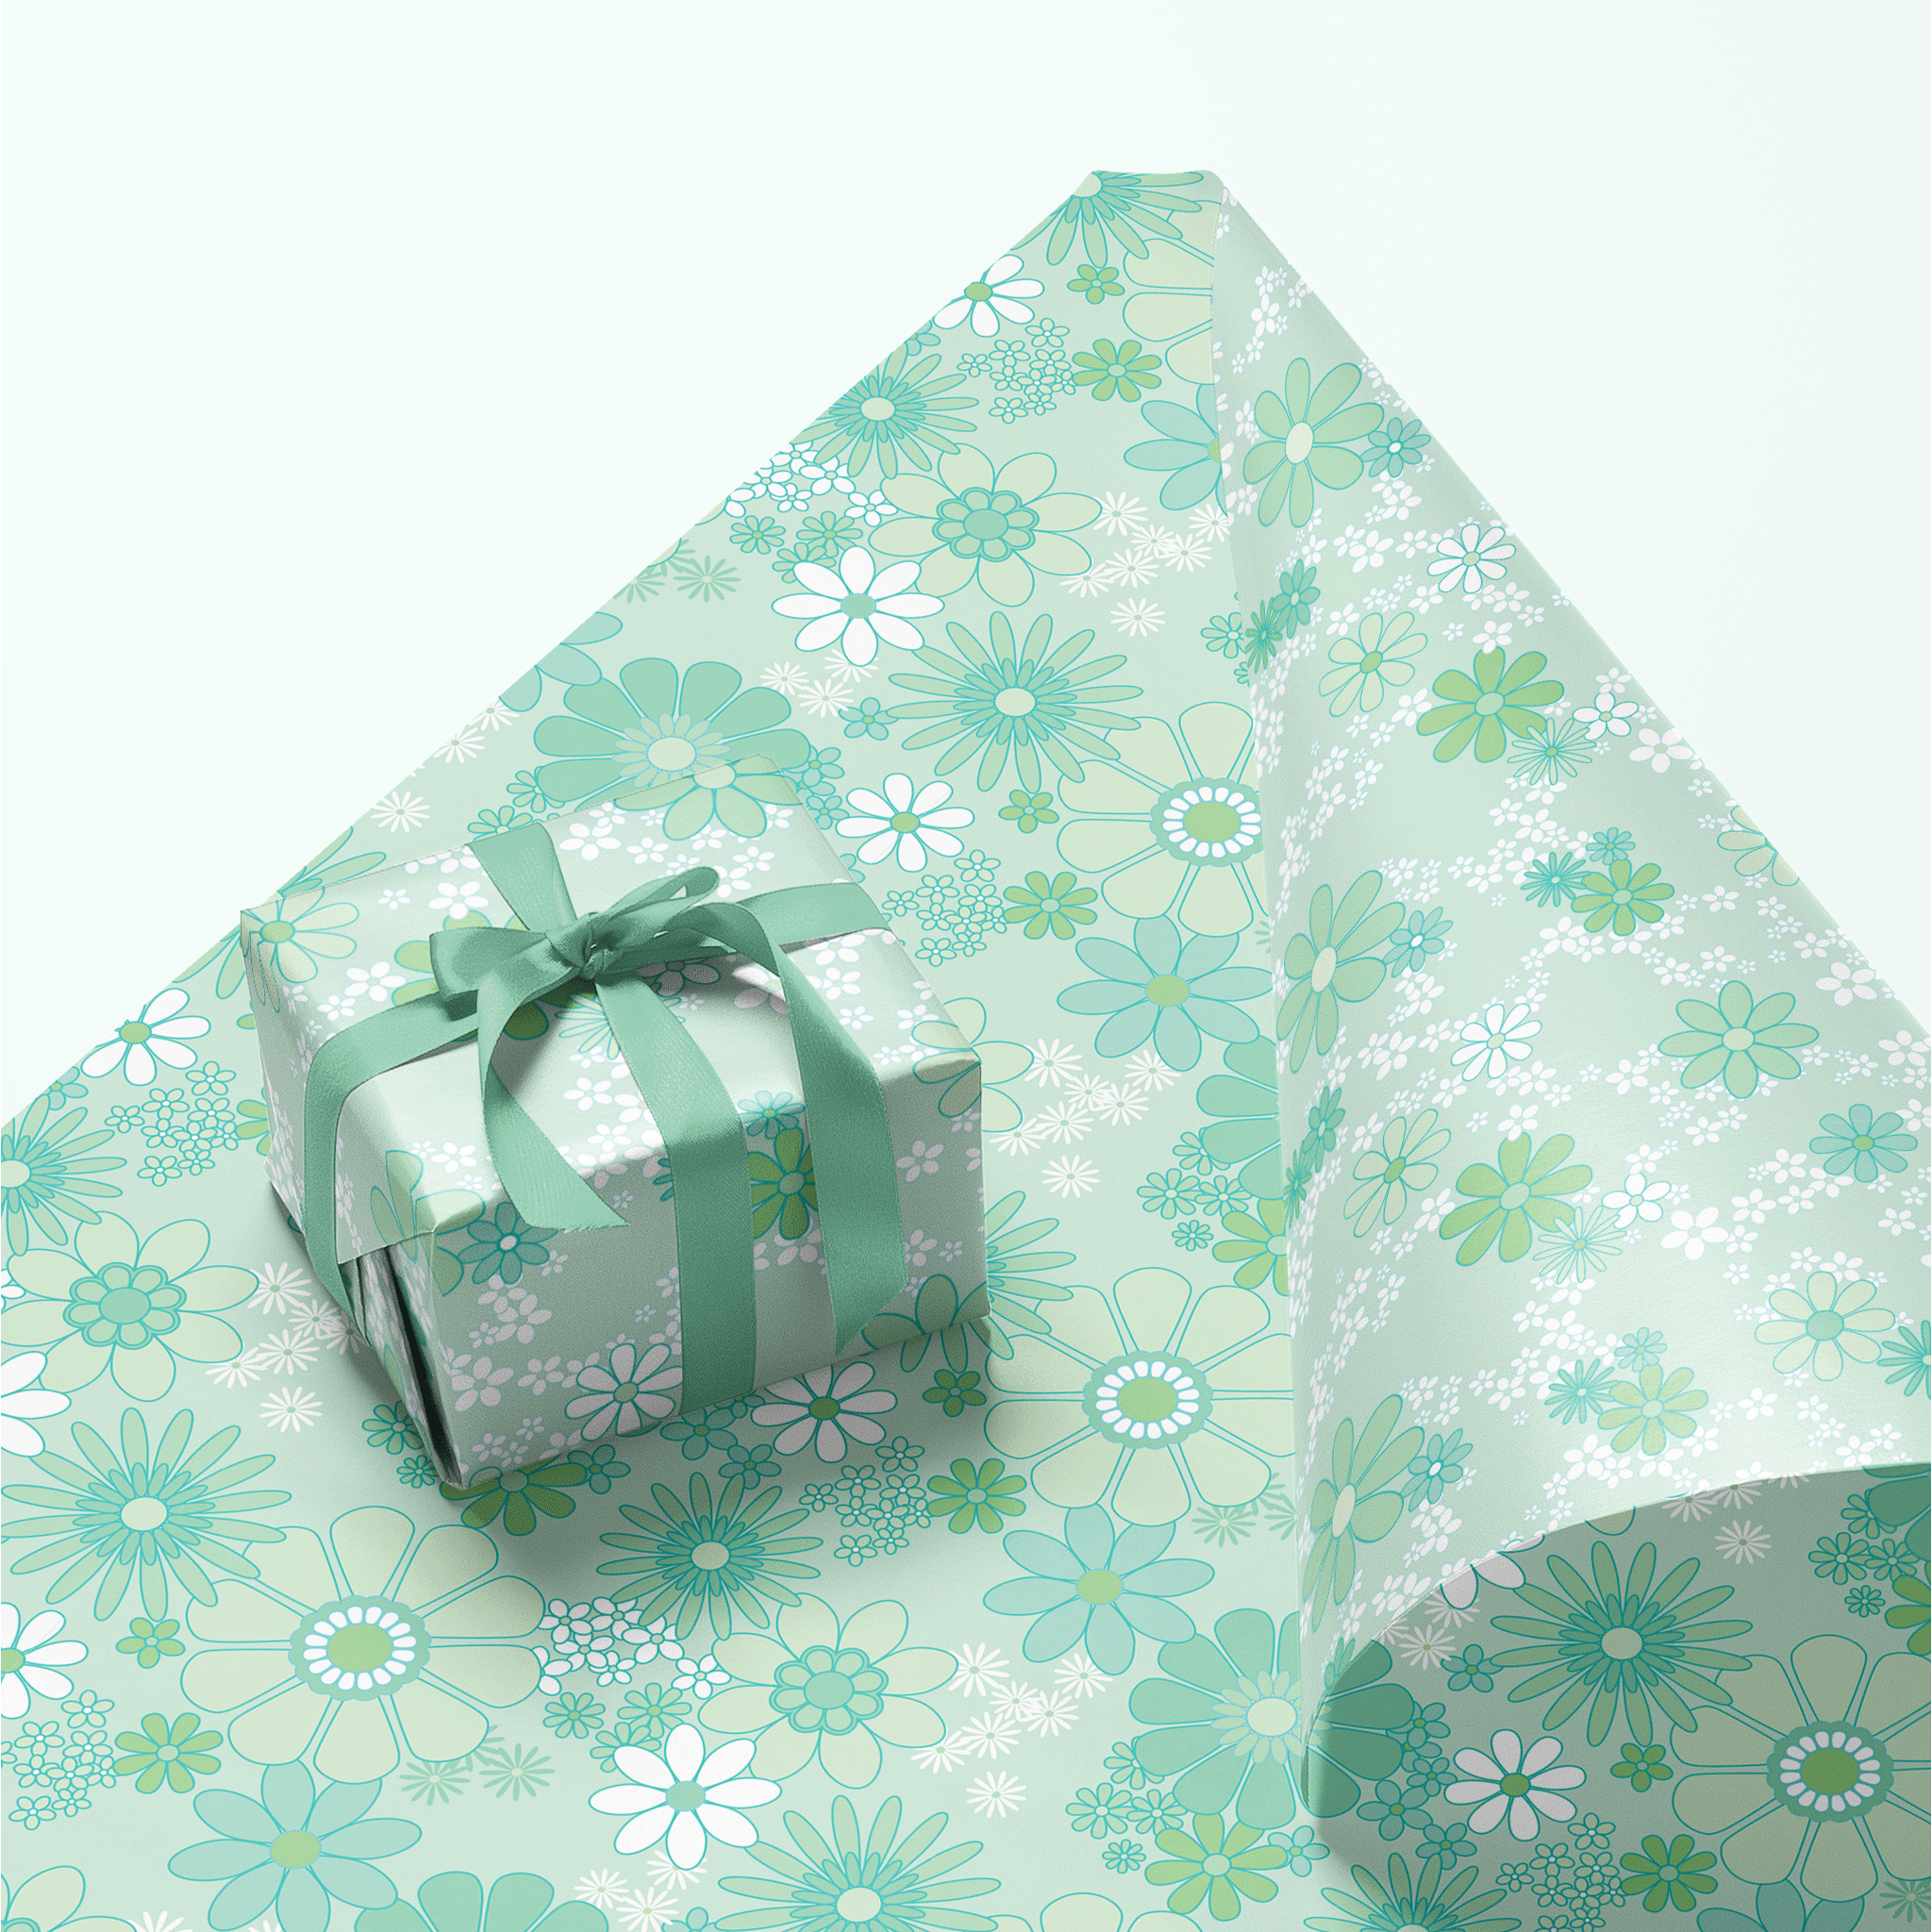 On a teal background is a gift box wrapped in a mint floral print wrapping paper with a velvet bow, not included with purchase.